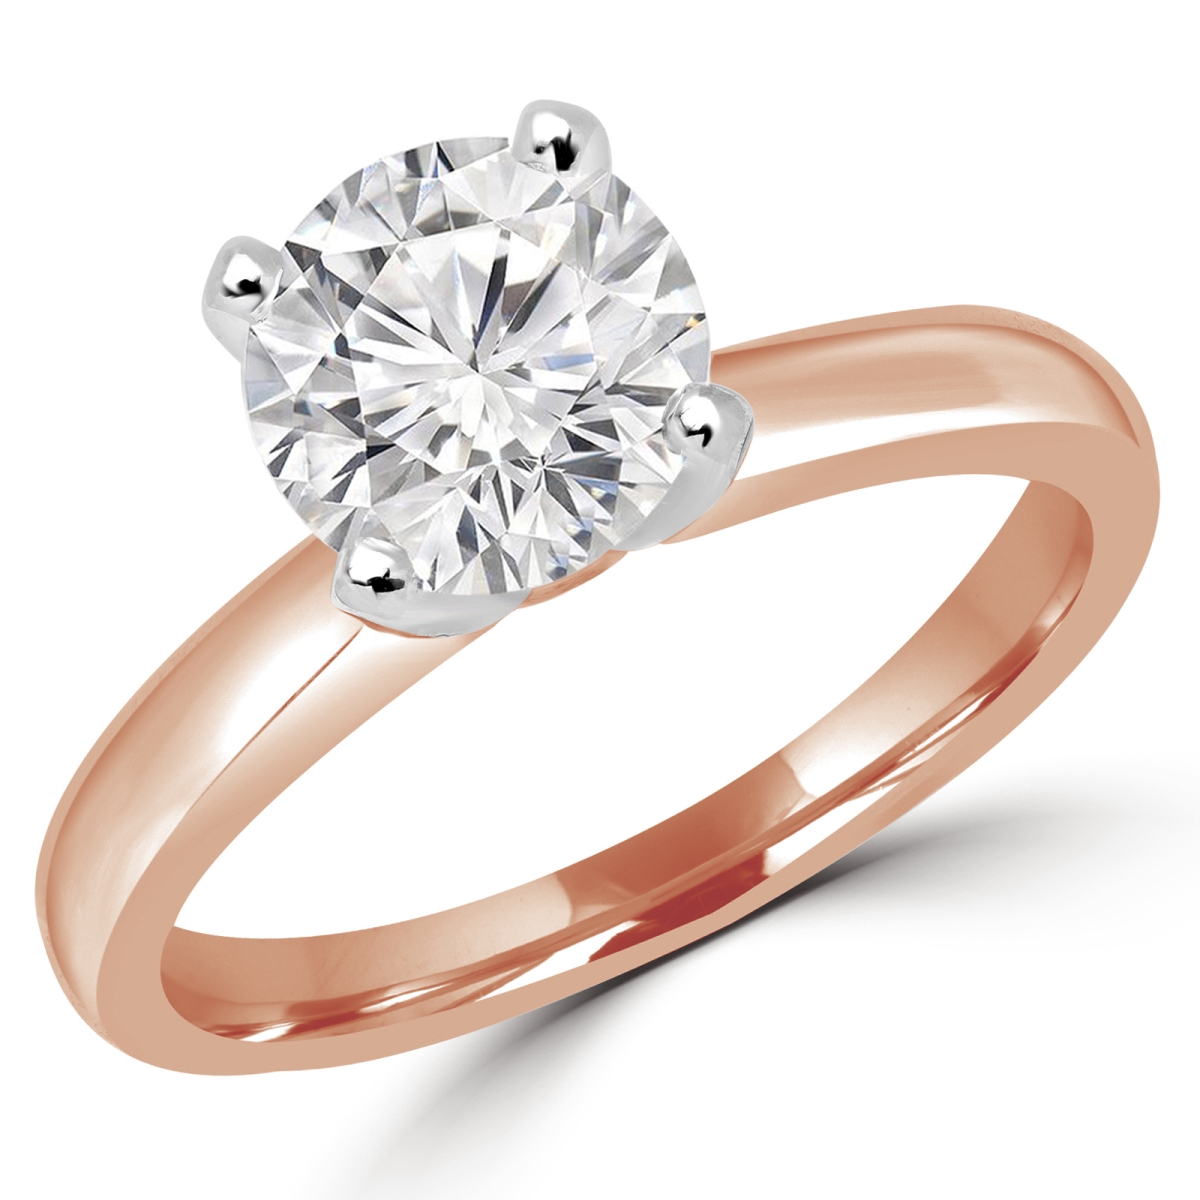 Picture of Majesty Diamonds MD180009-6.25 0.6 CT Round Diamond Solitaire Engagement Ring in 14K Rose Gold - Size 6.25